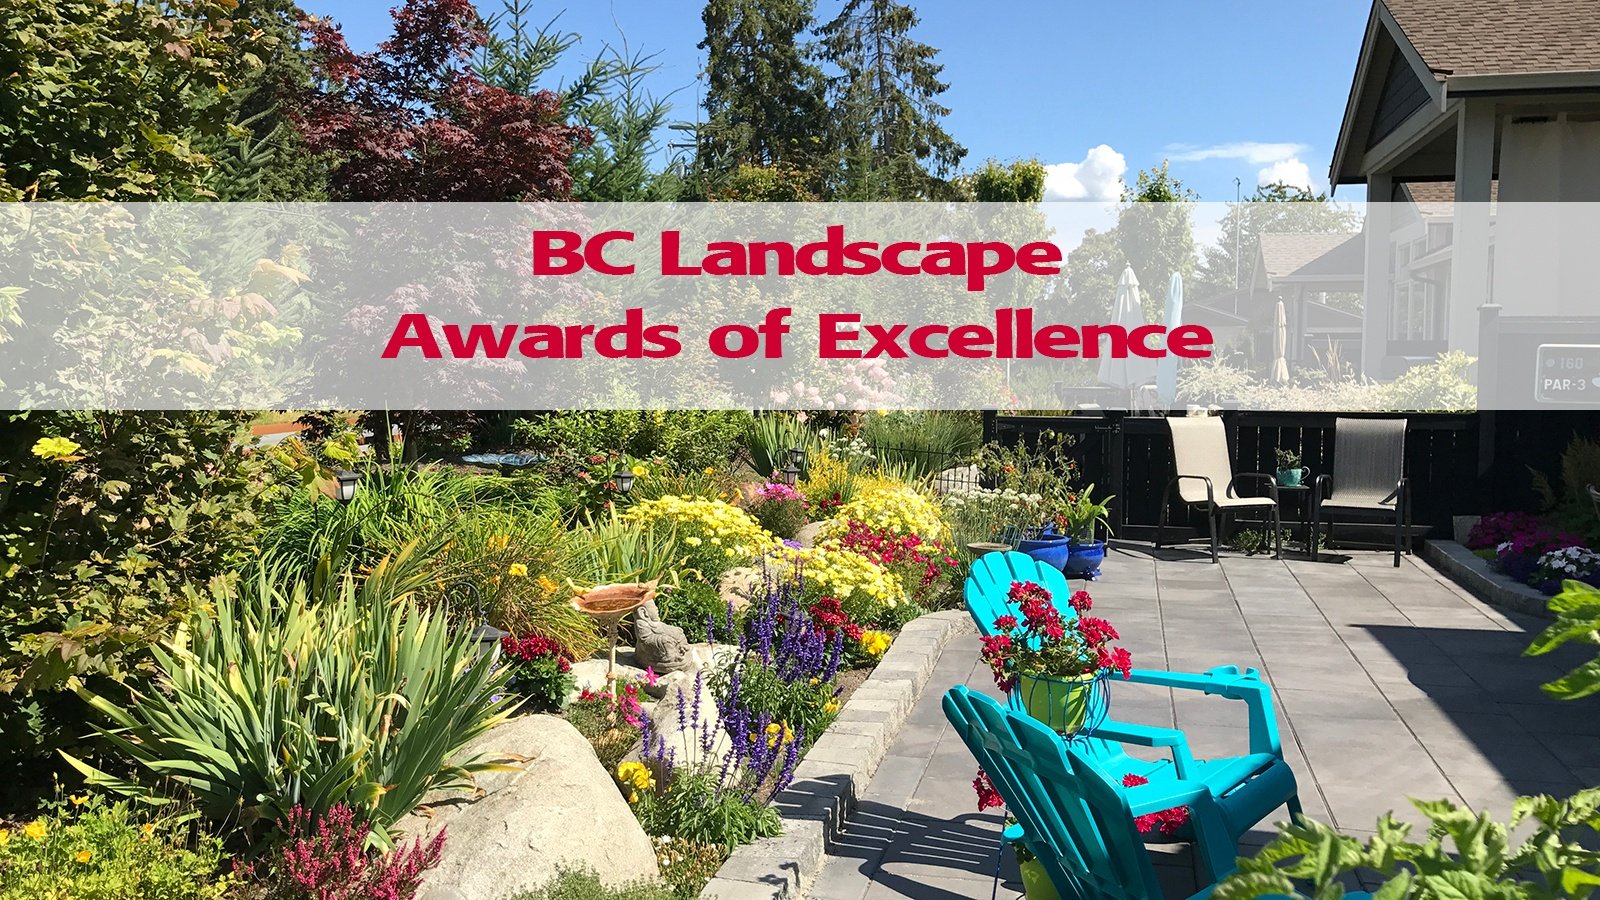 BC Landscape Awards of Excellence